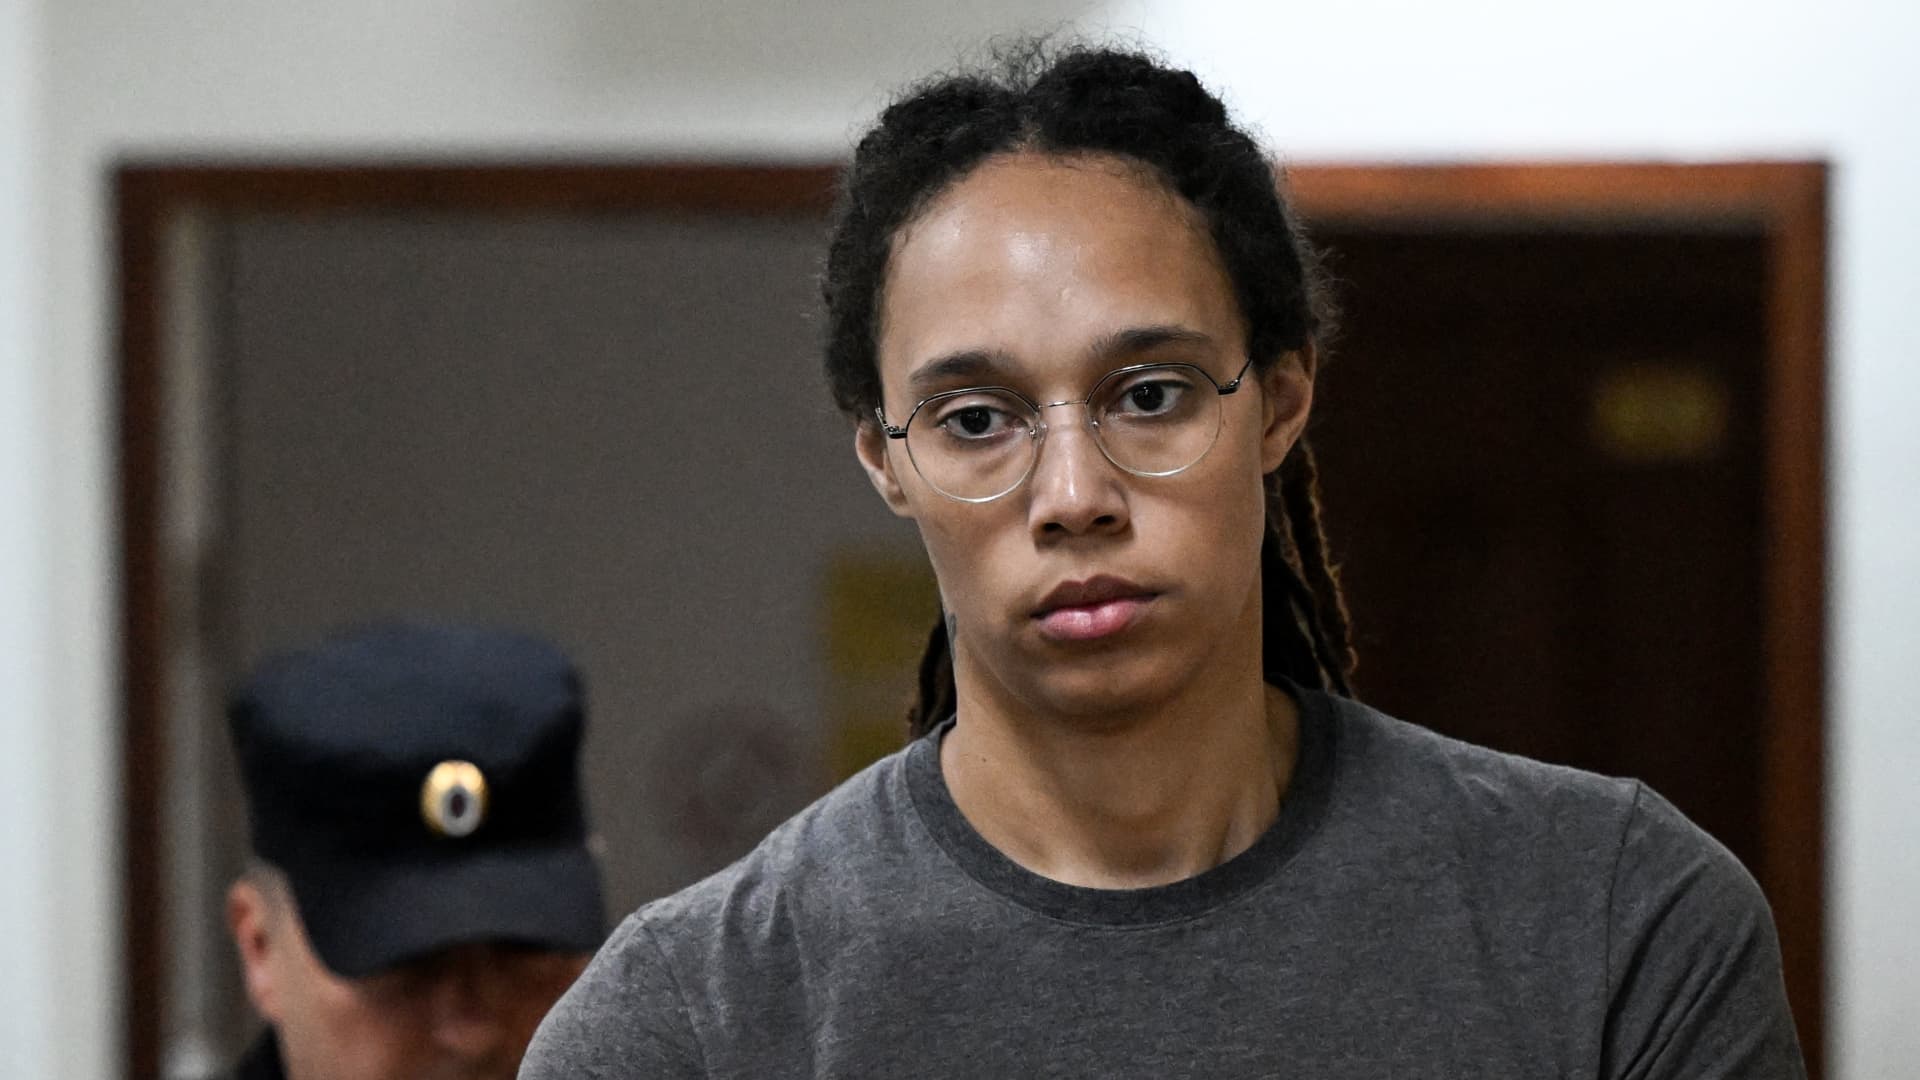 Russian court finds WNBA star Brittney Griner guilty on drug charges